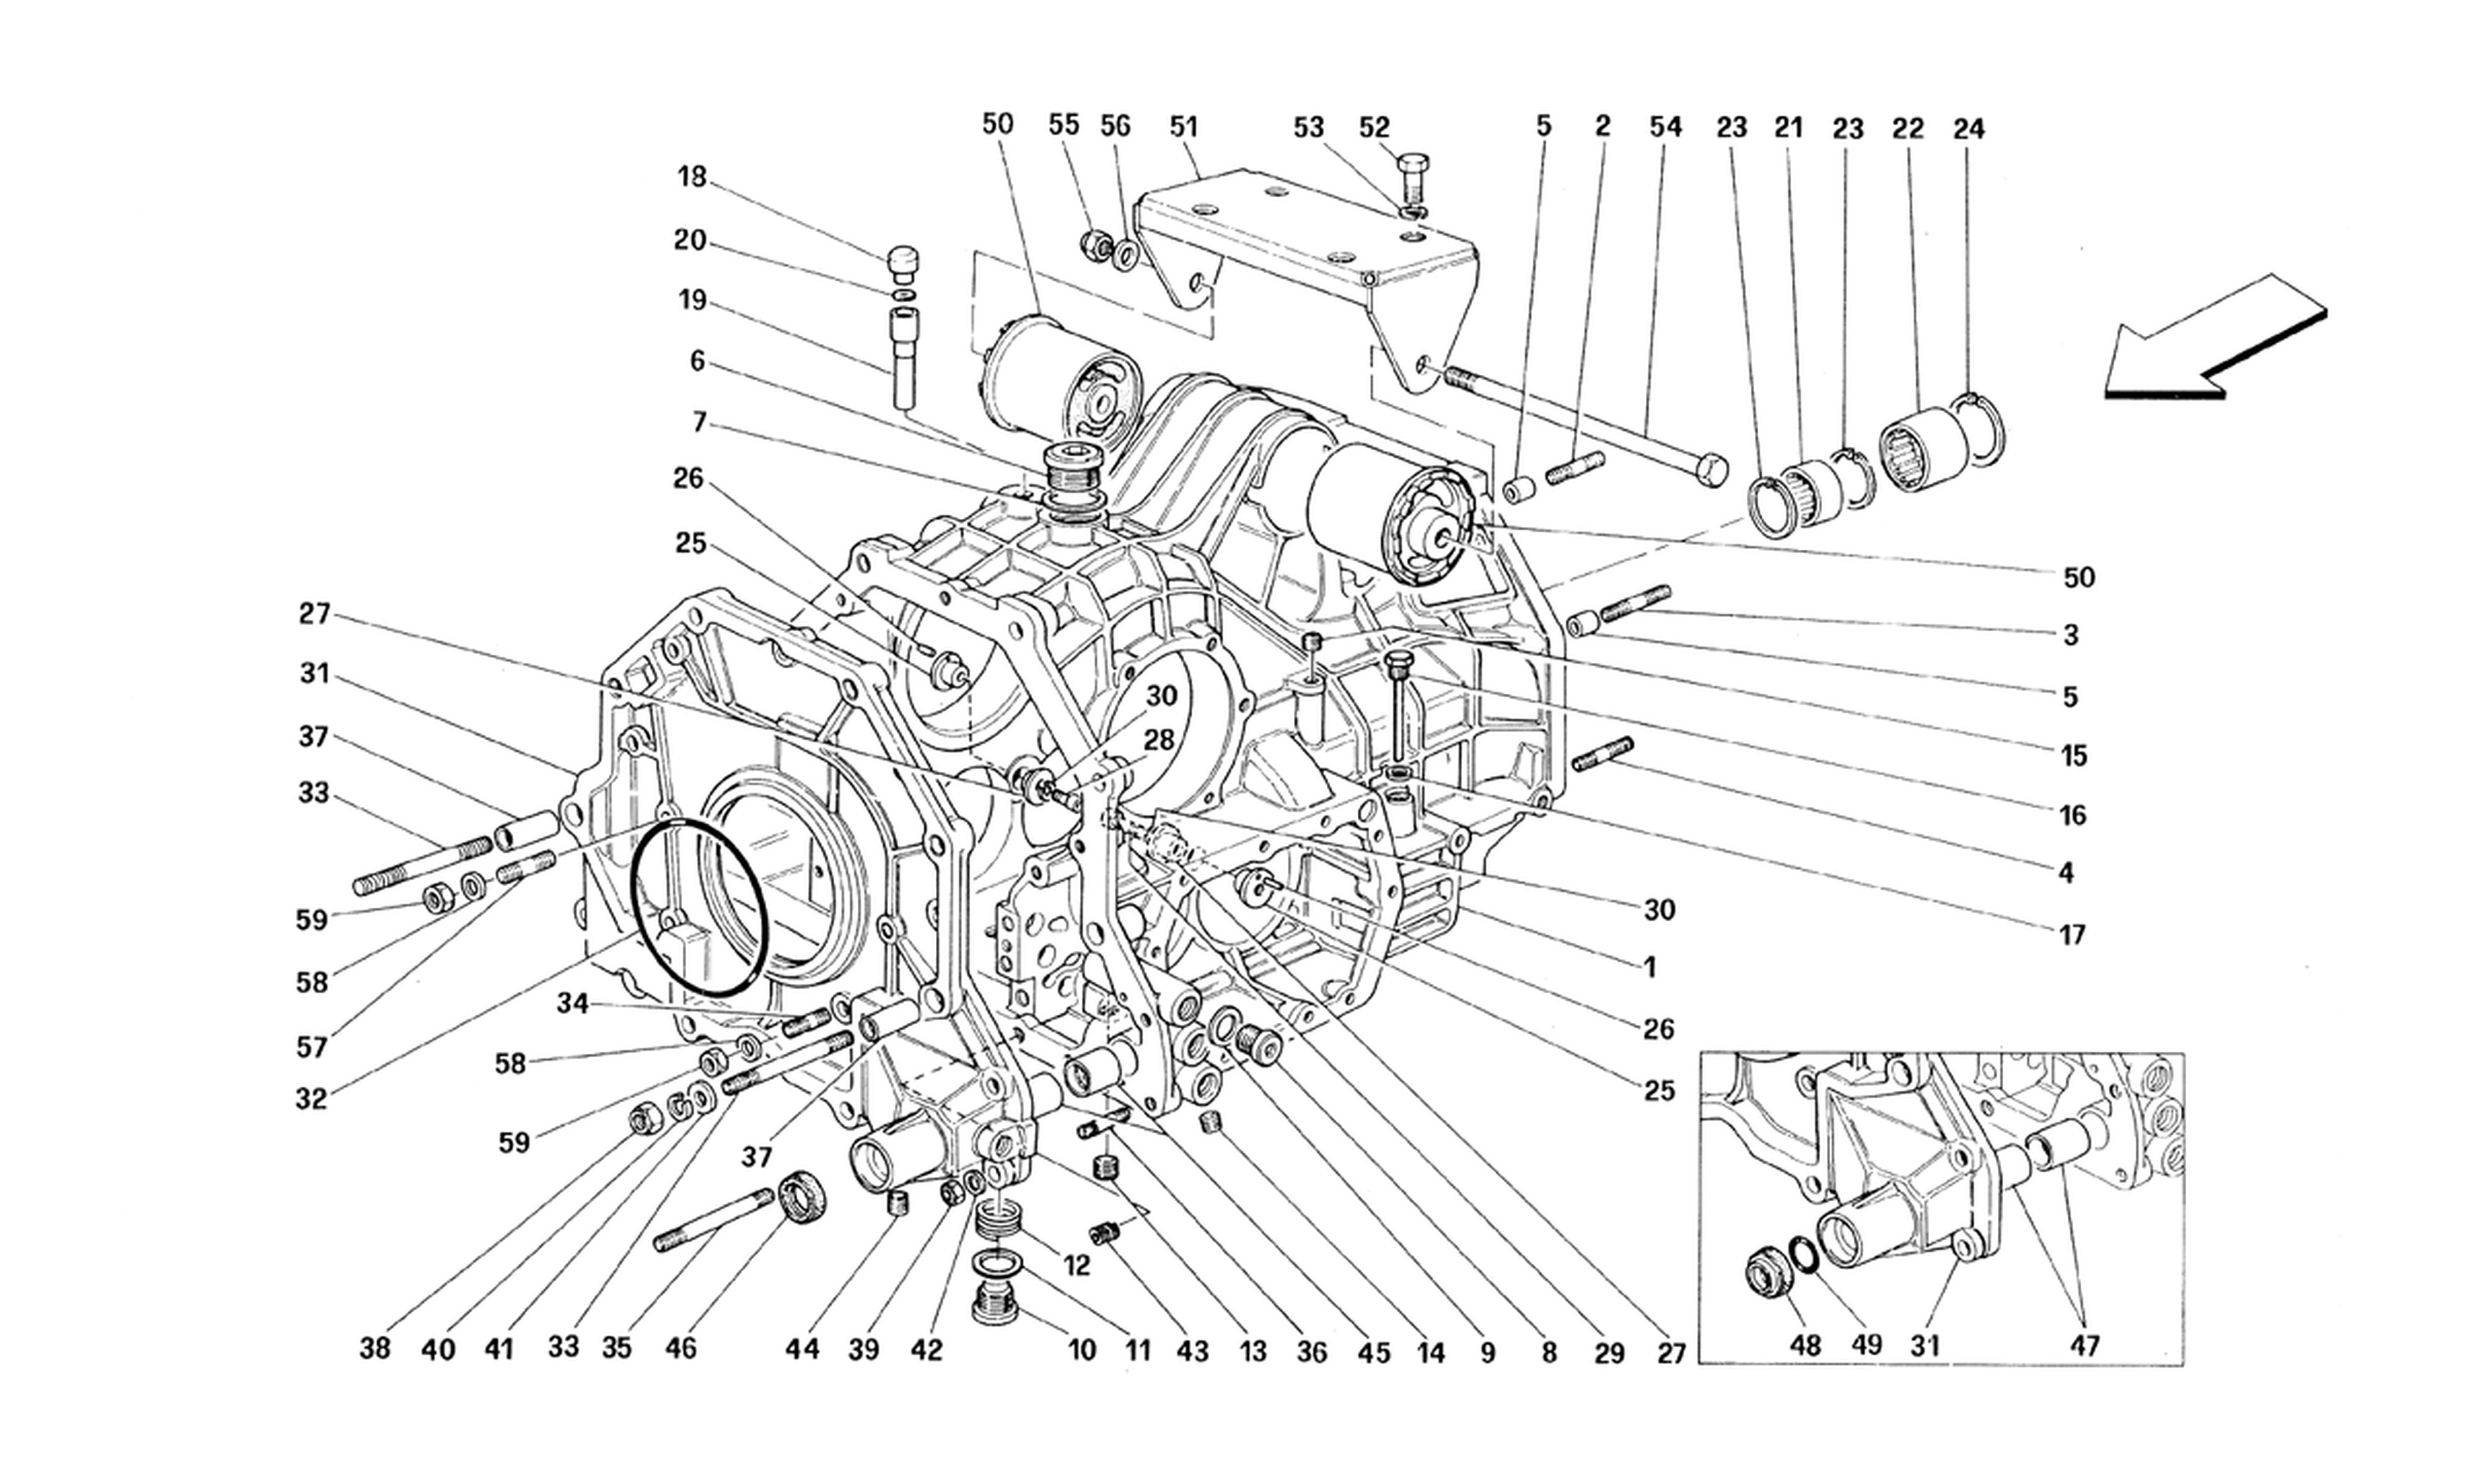 Schematic: Gearbox - Differential Housing And Intermediate Casing